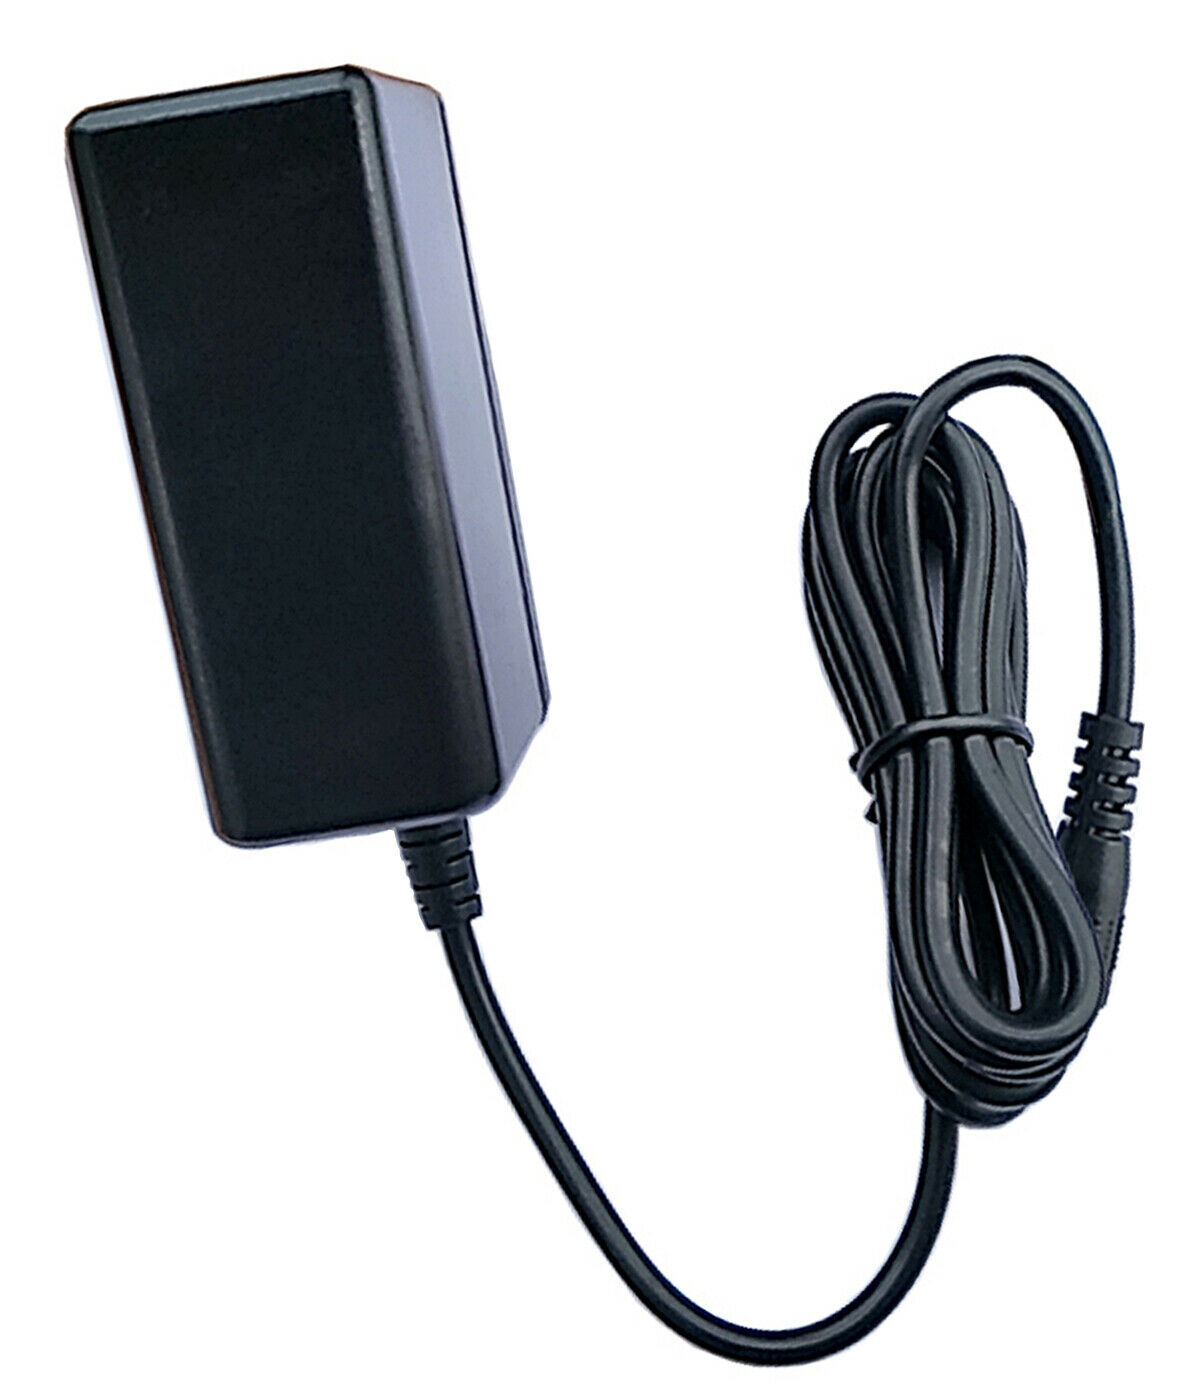 *Brand NEW*Klipsch KMC 3 Wireless Speaker AC DC Adapter Charger Power Supply Cord Mains